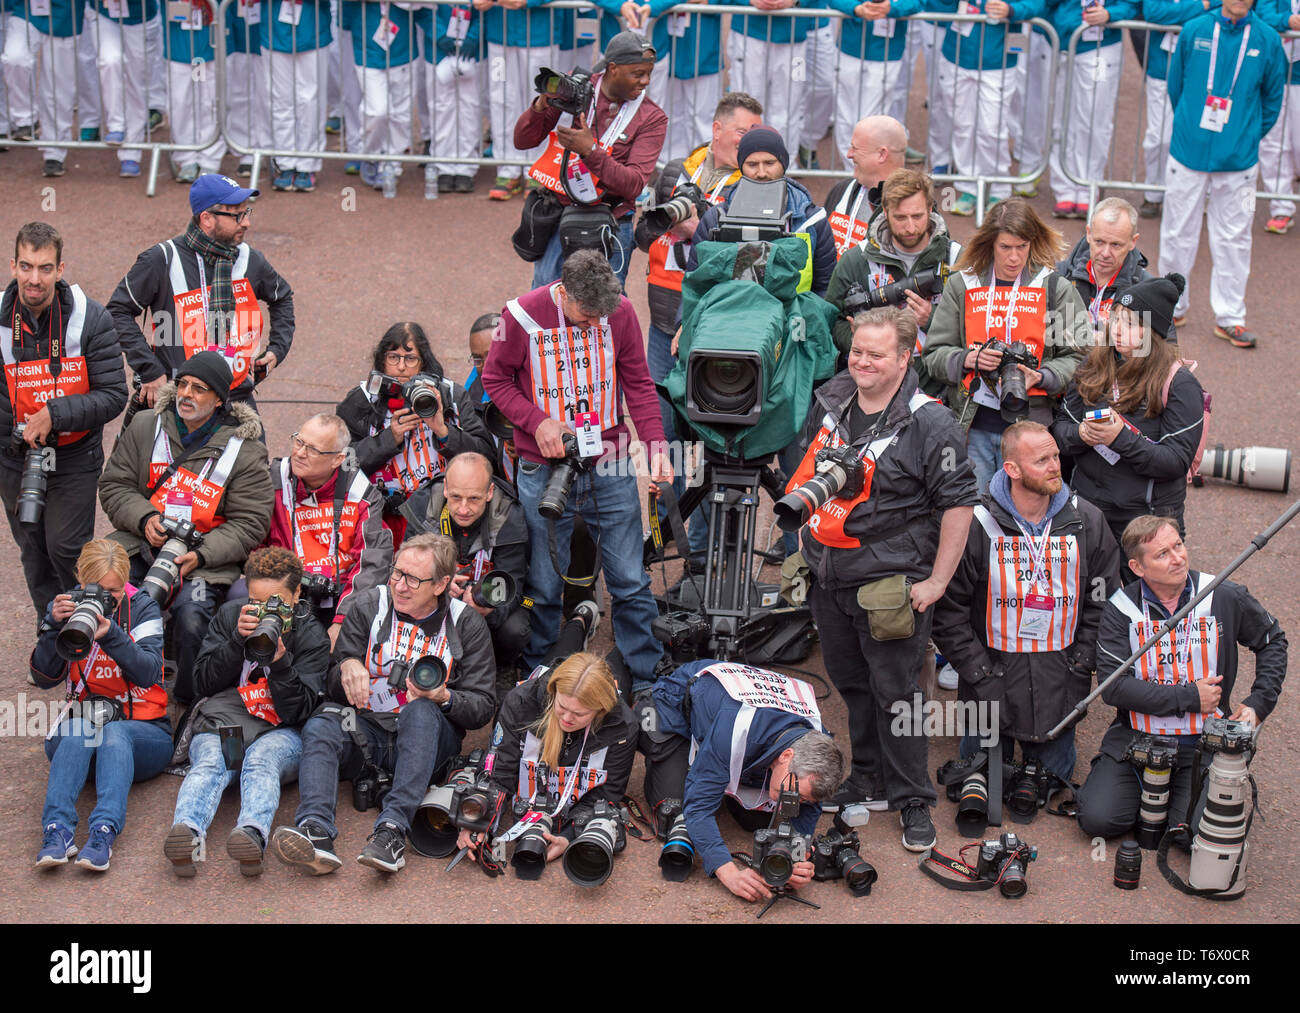 London, UK. 28th April, 2019. Photographers at The London Marathon race finish on The Mall in Westminster. Credit: Malcolm Park/Alamy Live News. Stock Photo